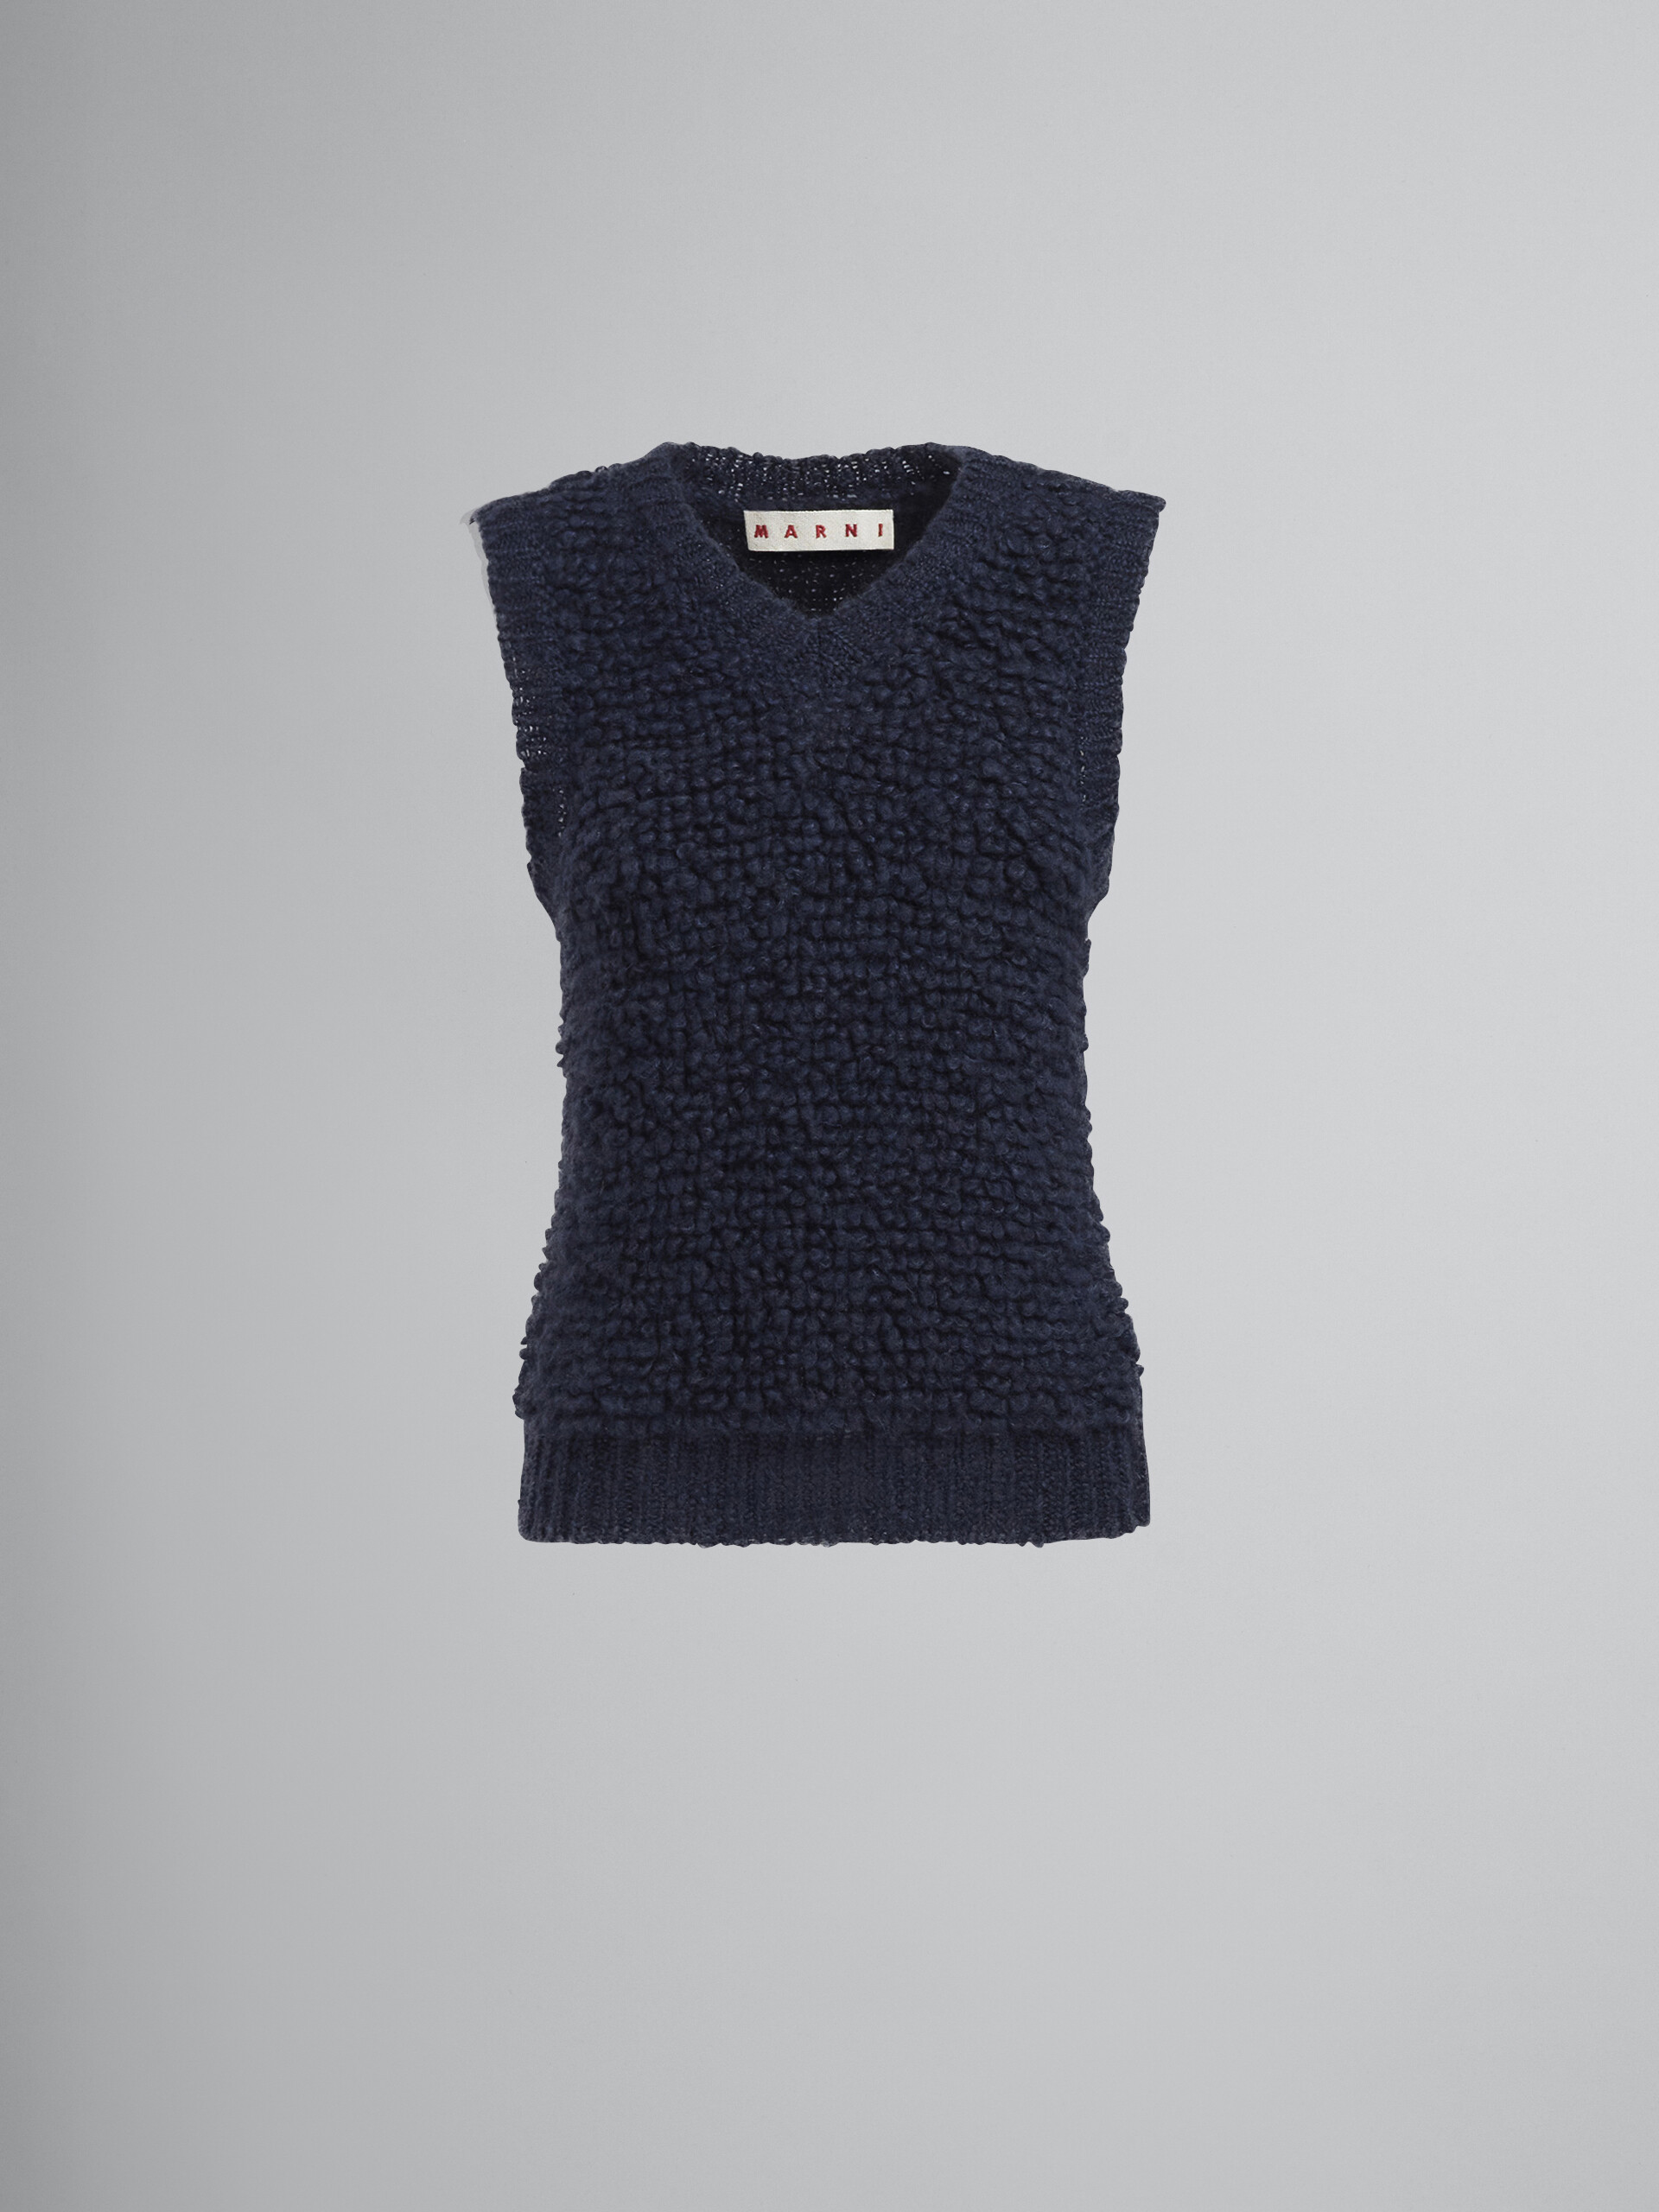 Gilet in mohair - Pullover - Image 1